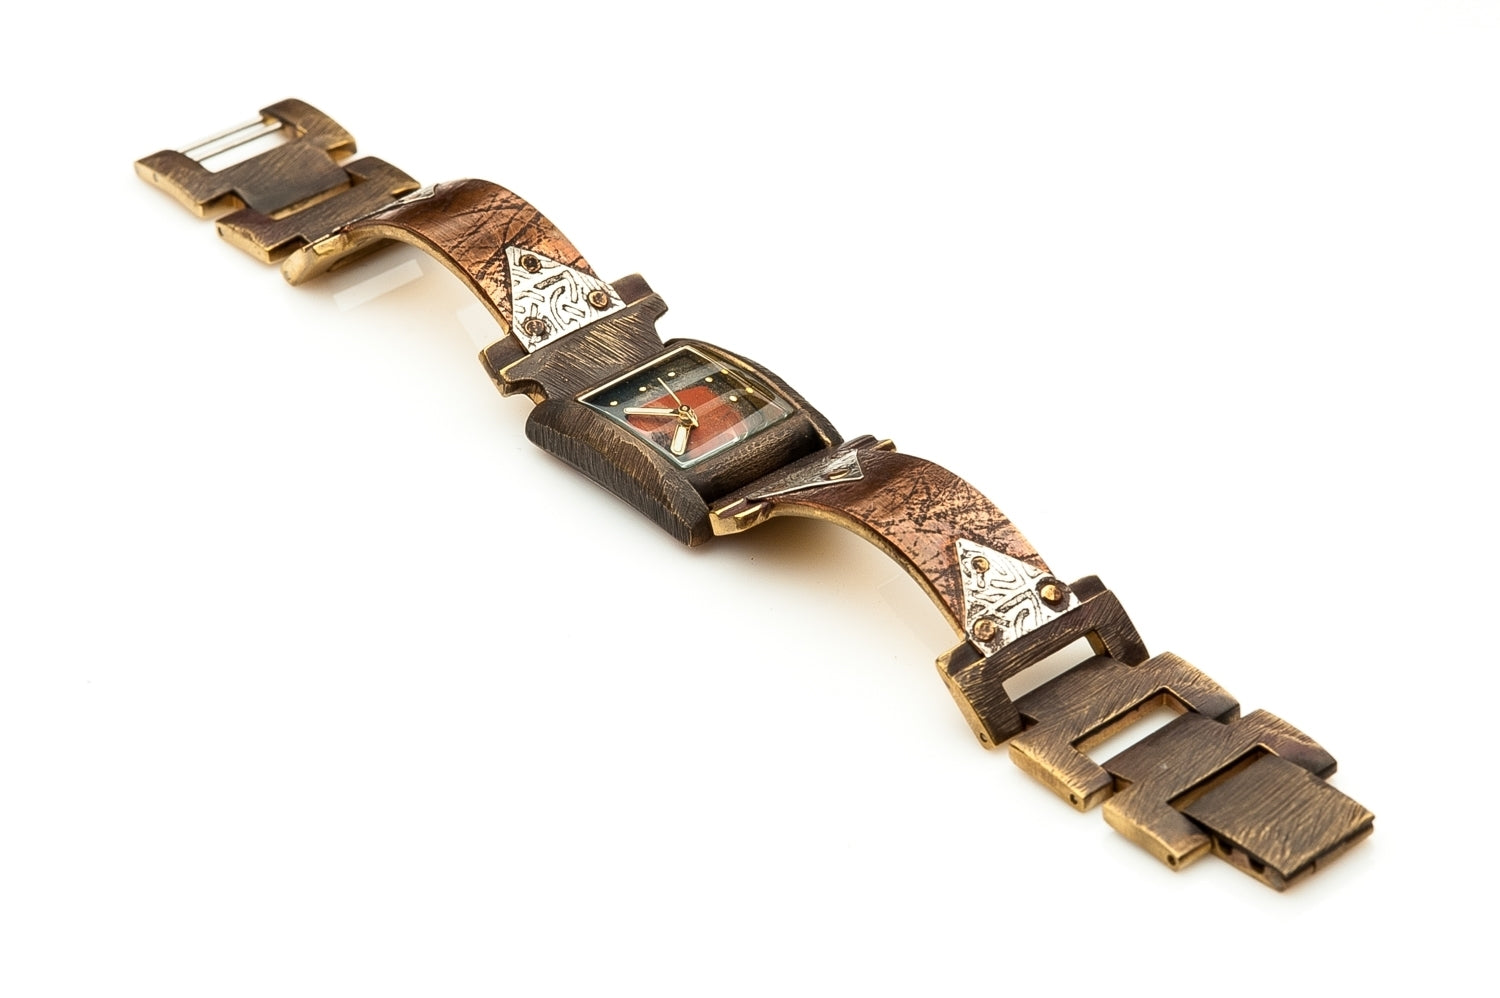 The Ponte Vecchio watch in copper and silver. When it lies flat, the curves of the metal band recall the Ponte Vecchio’s arches over the Arno.